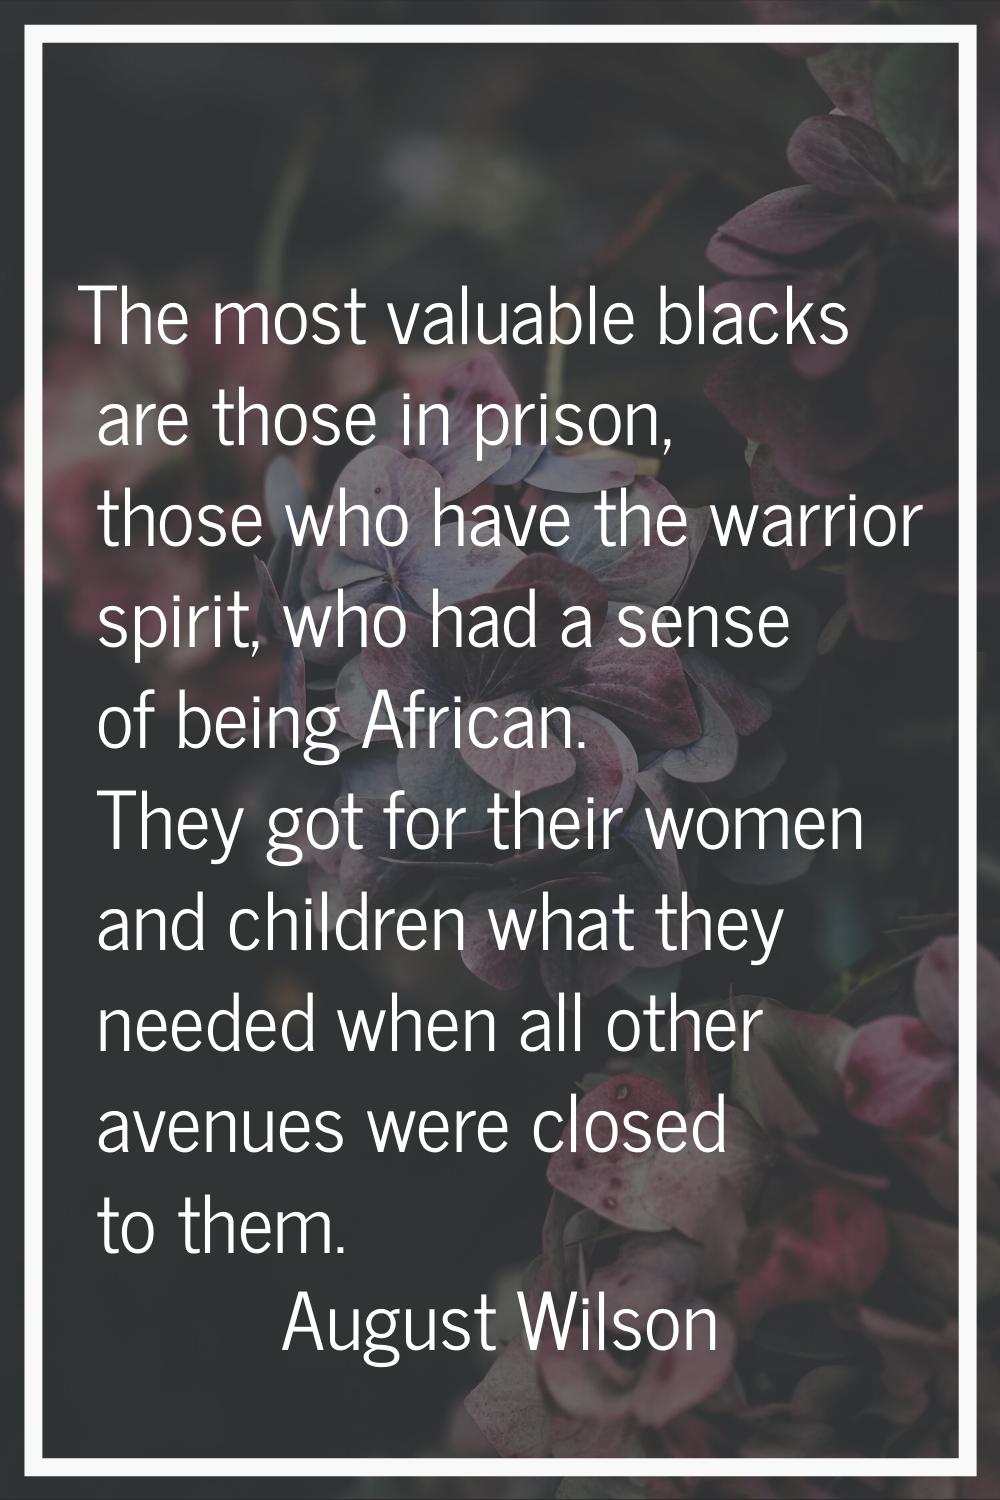 The most valuable blacks are those in prison, those who have the warrior spirit, who had a sense of